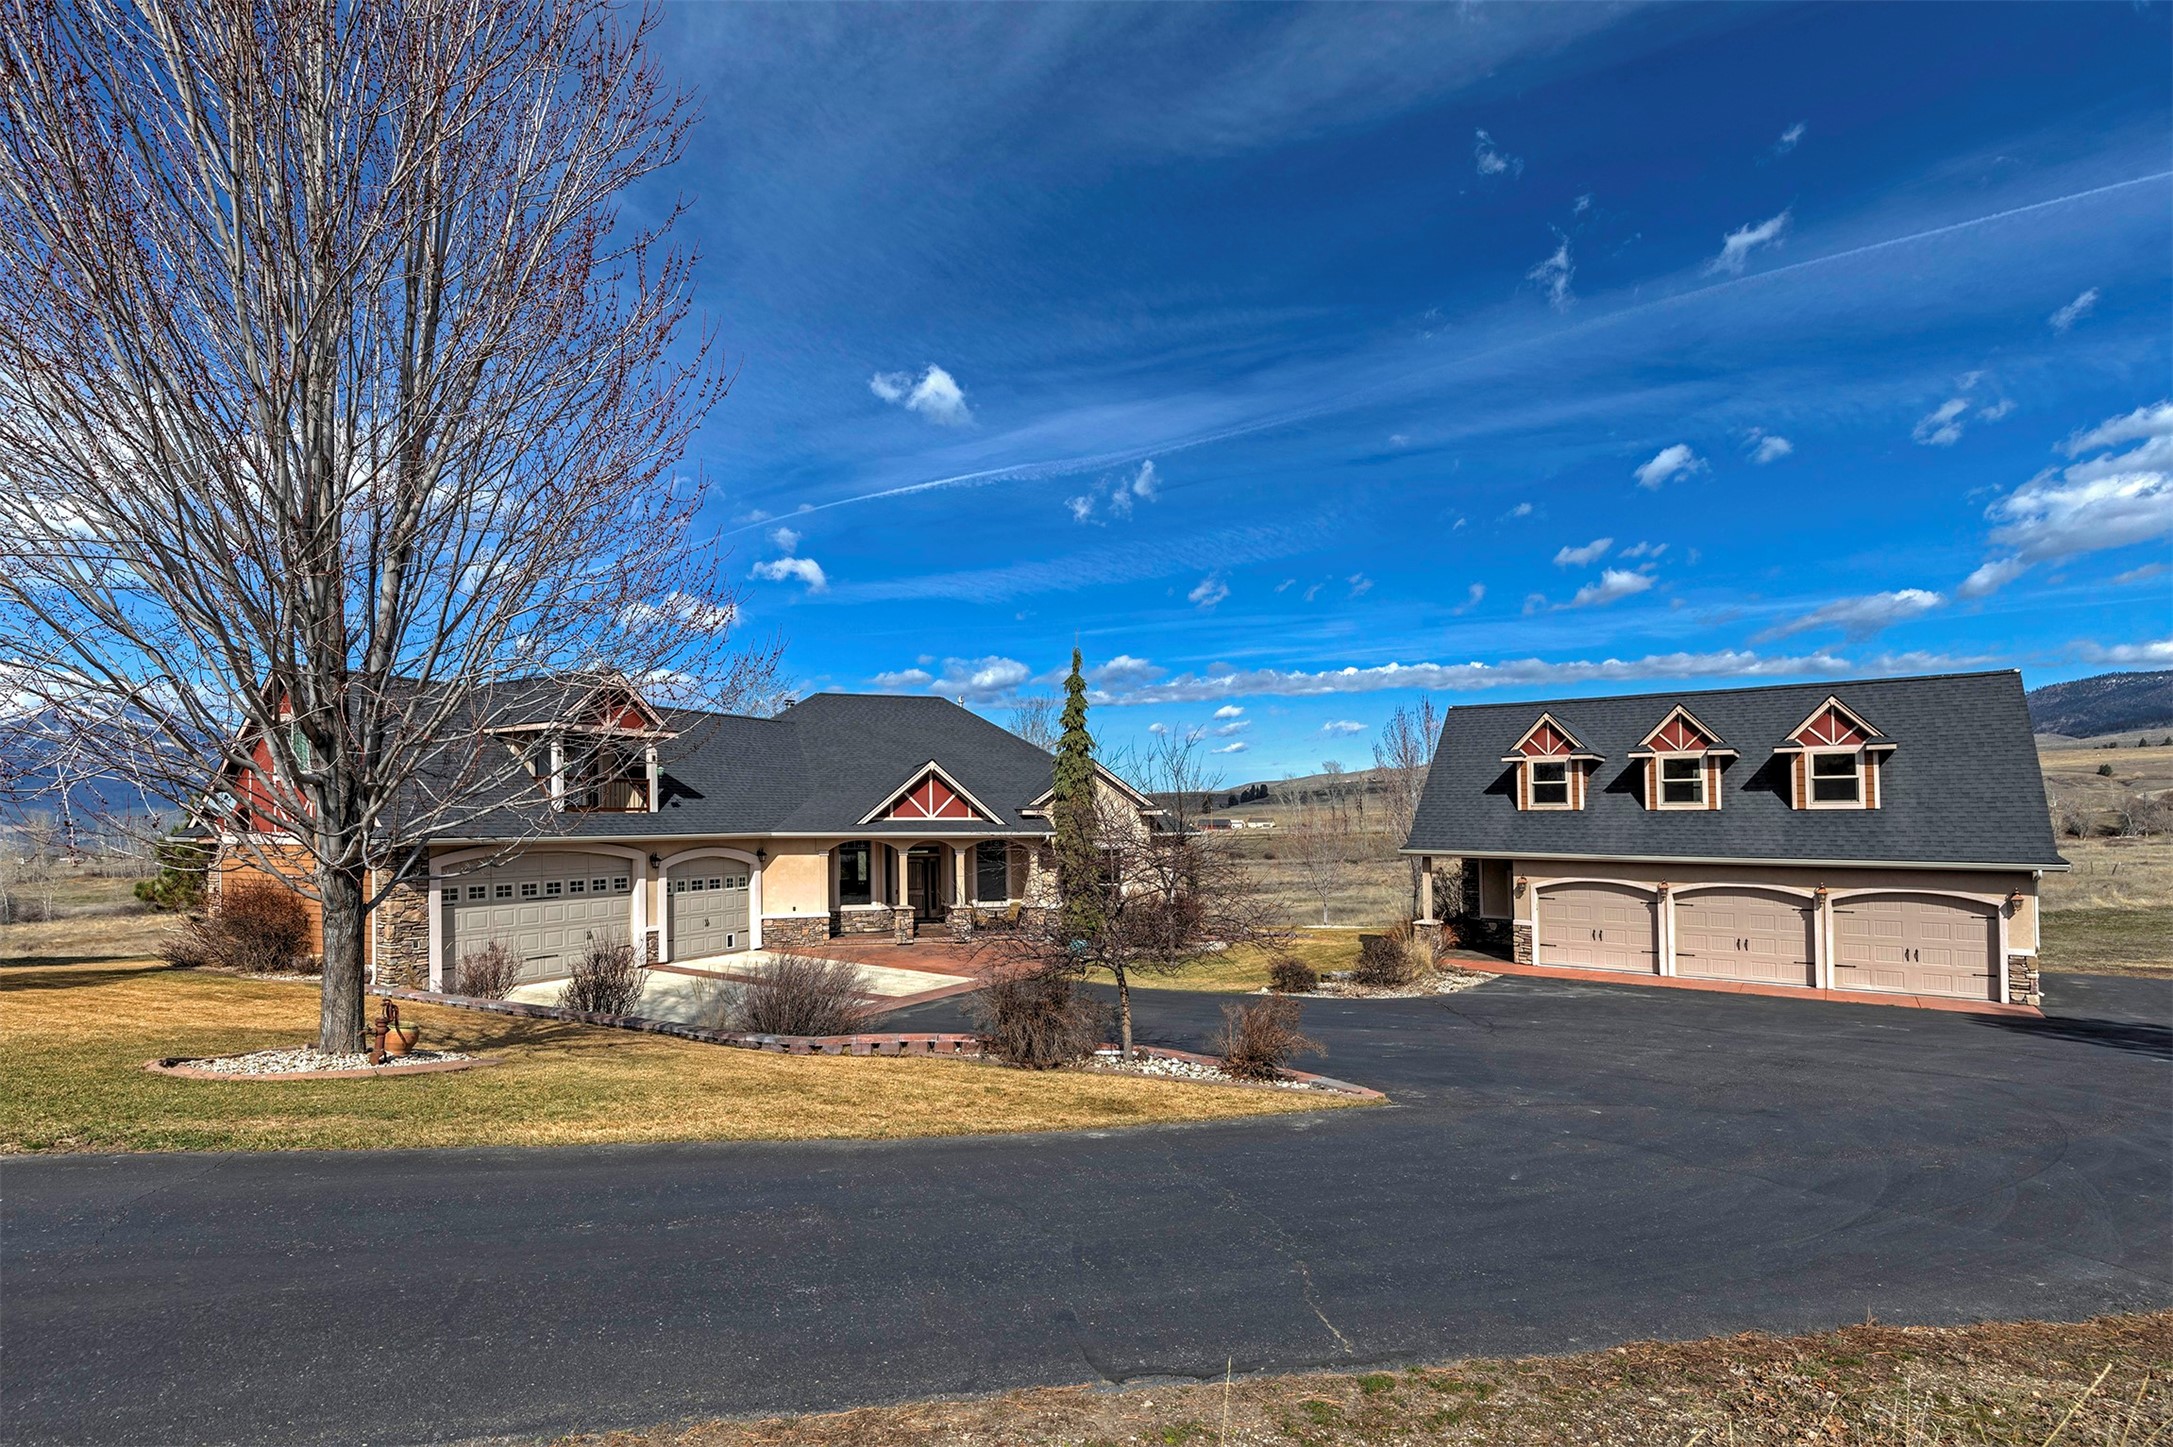 Stunning and inviting custom home on 54.23 acres offers 5595 Sq Ft, 6 bedrooms & 4.5 baths with secluded, end of road privacy and gorgeous mountain views plus 1,700+ ft of 8 mile creek frontage. Extensive stamped concrete in 3-car garage, front porch entry and upper & lower back patios. Slate entry & vaulted living room with beautiful rock fireplace. Well appointed slate & oak floors, 10' ceilings and 8' solid alder doors/trim throughout. Spacious, custom alder kitchen with extensive granite tops, breakfast bar & dining area w/built-ins & back patio access to enjoy the views & peaceful surroundings. Master suite offers large walk-in closet w/built-ins, double granite vanities, jetted tub & private entry to back patio. Upper guest suite. Lower level walk-out includes family room, bedrooms, full bath, mini bar & storage. 25x40 3-car shop, work bench & upper bonus room. Professionally landscaped with fire pit & water feature (49+ acre lot has 3 - 60' road access points and NO covenants).